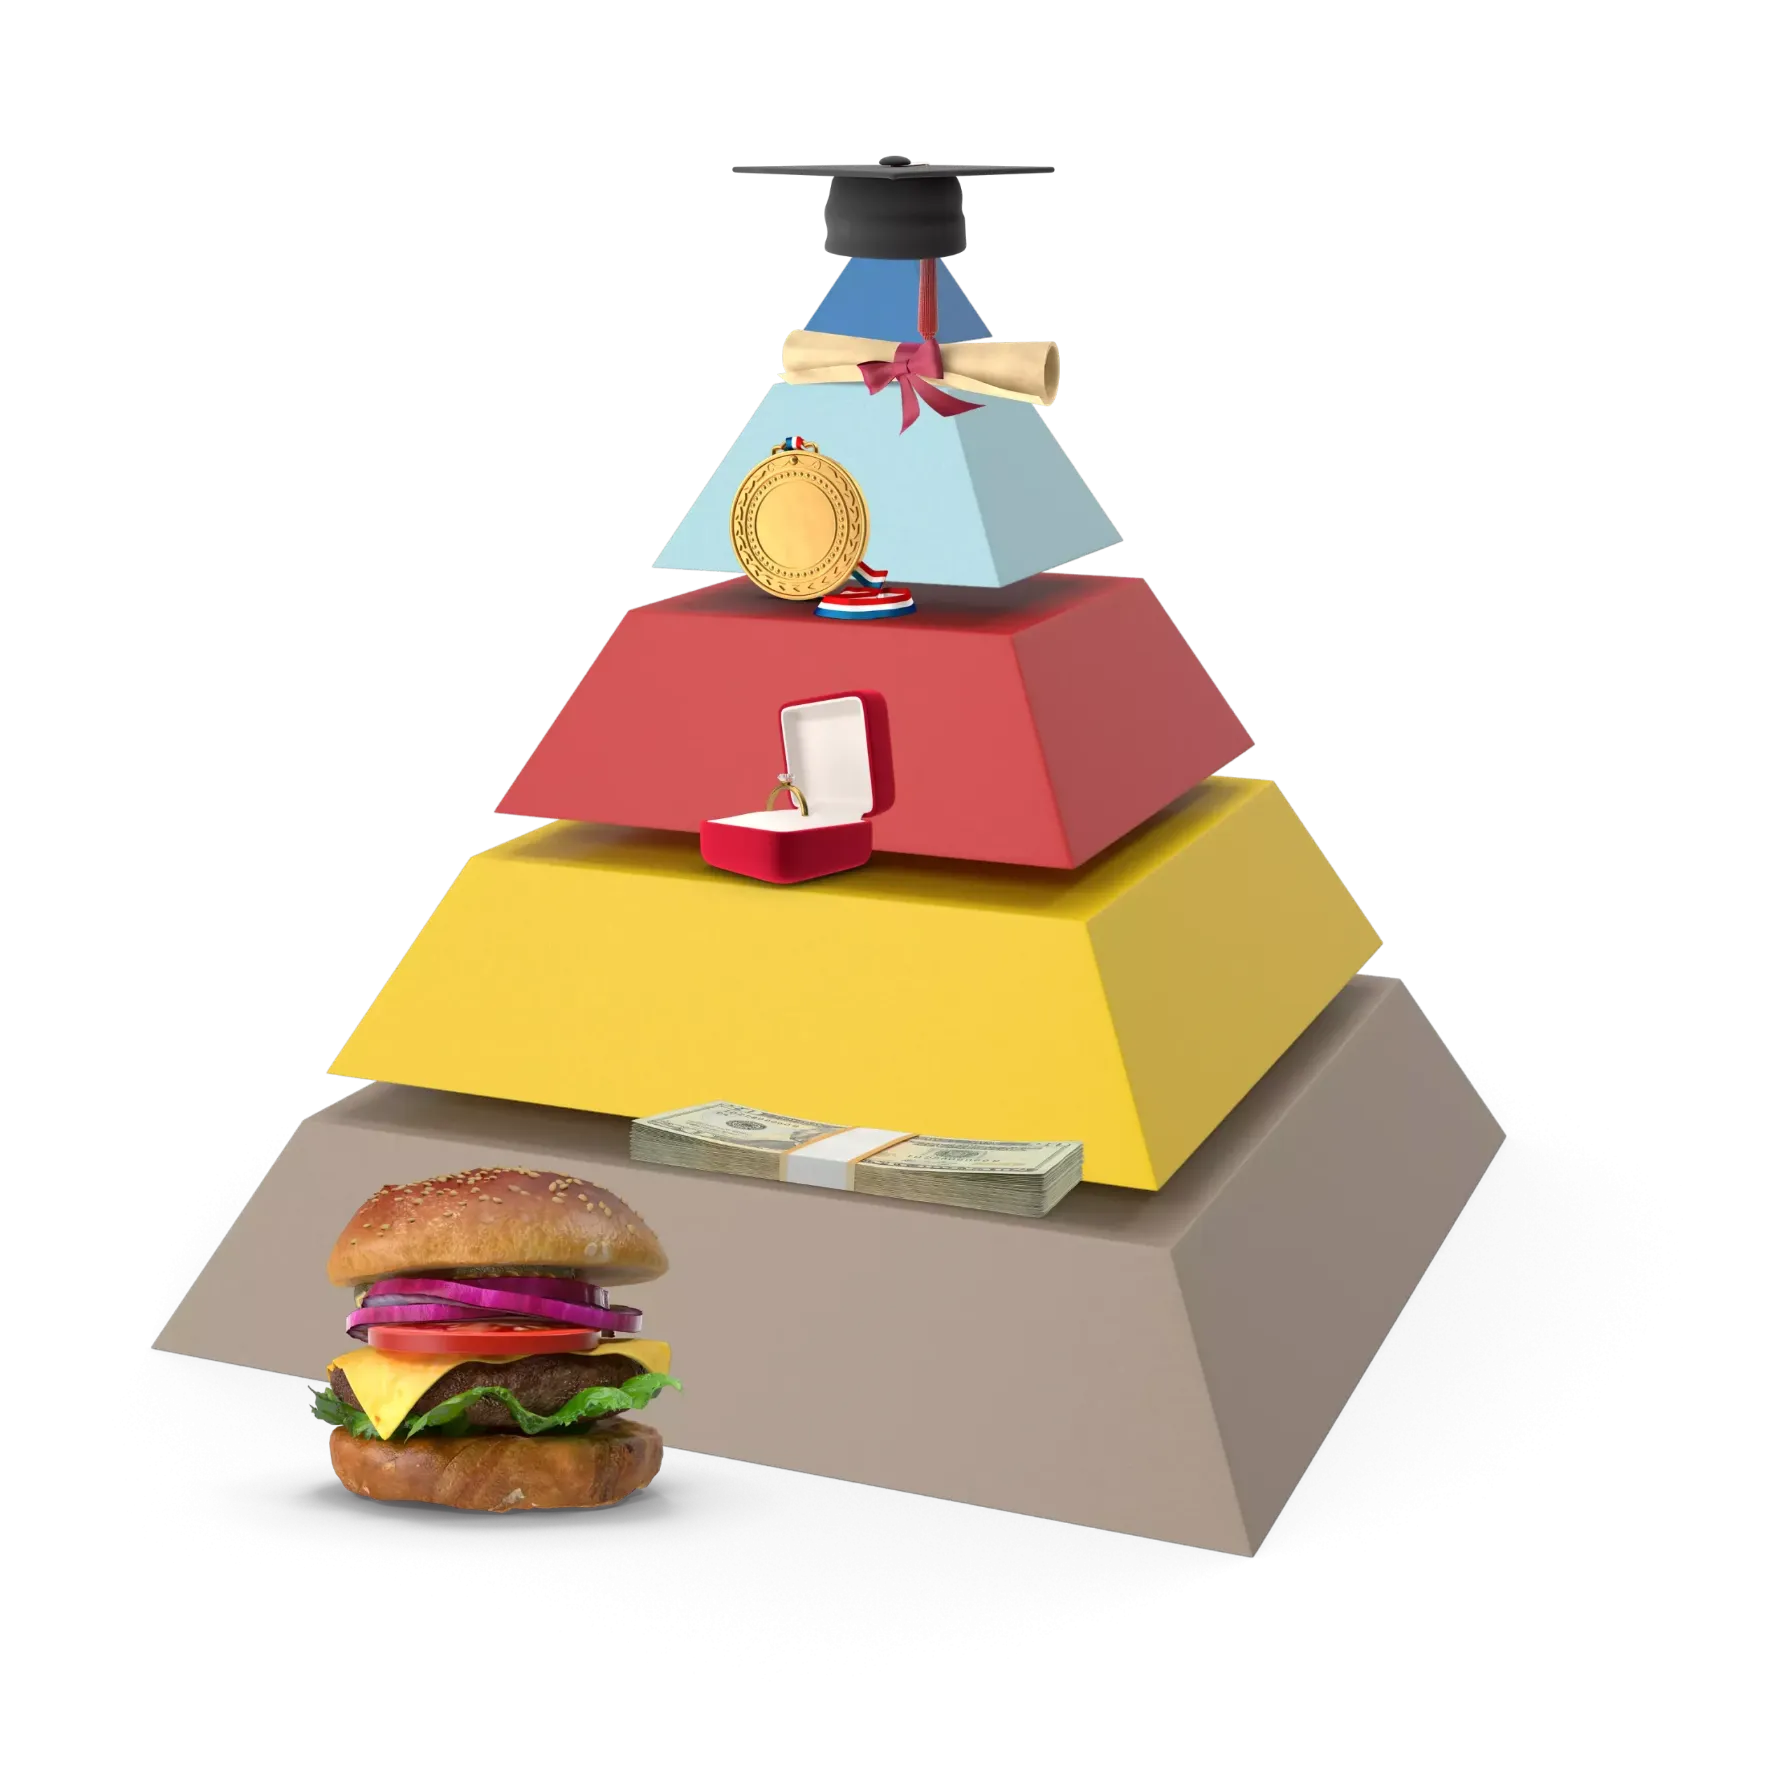 The graphic representation of Maslow Pyramid of Needs as the corresponding quickcard header image